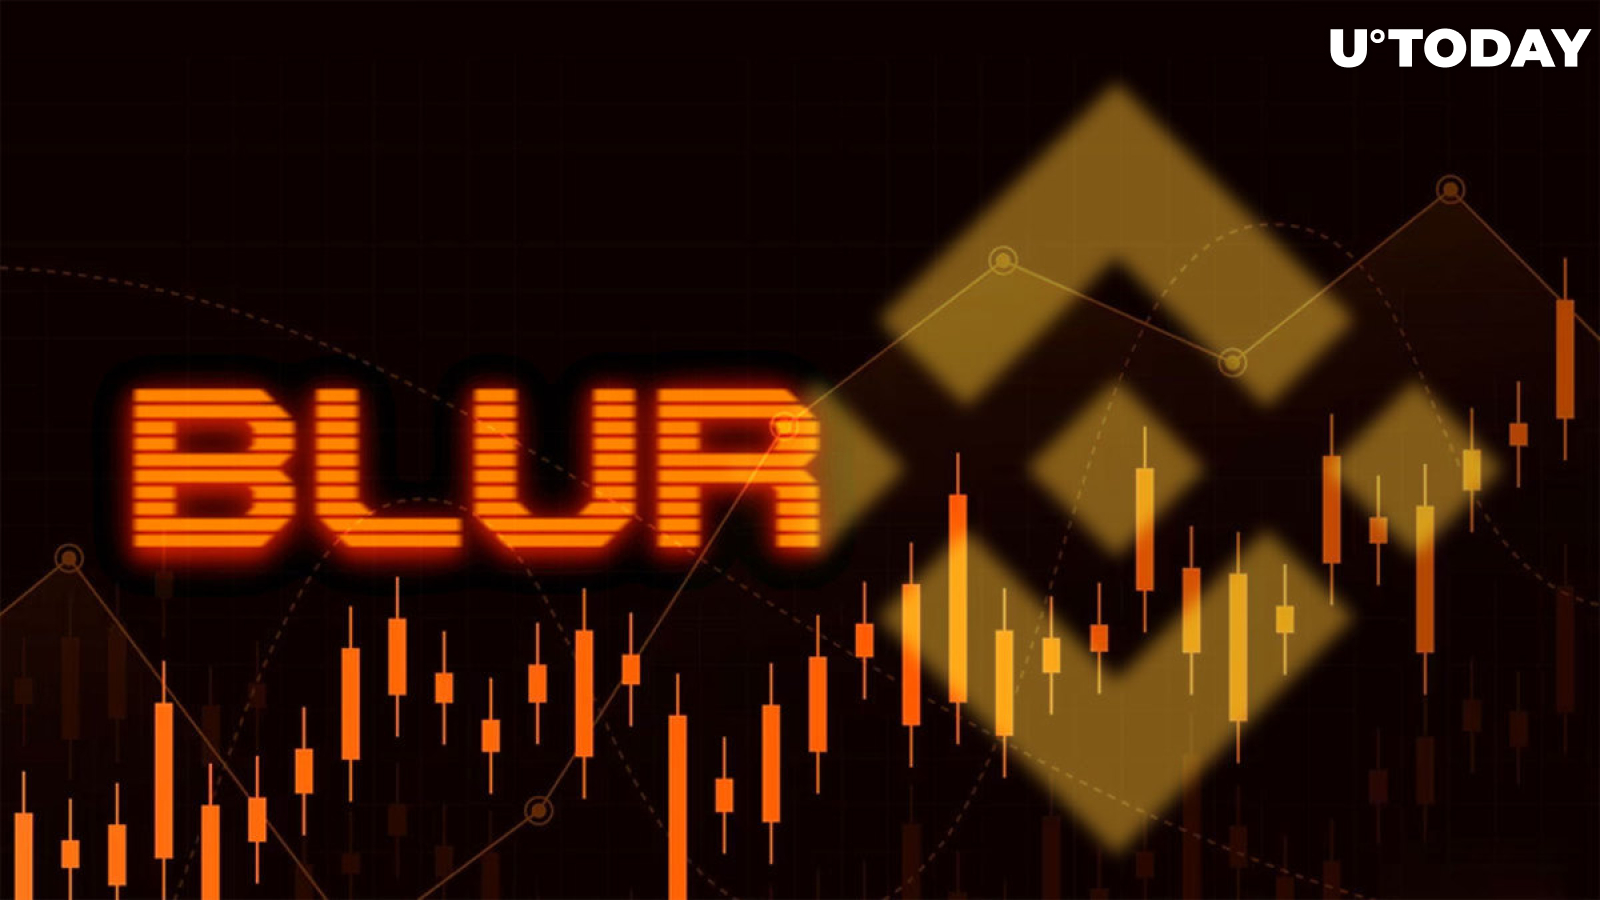 BLUR Jumps 10% as Binance Launches BLUR/USDT-M Perpetual Contracts